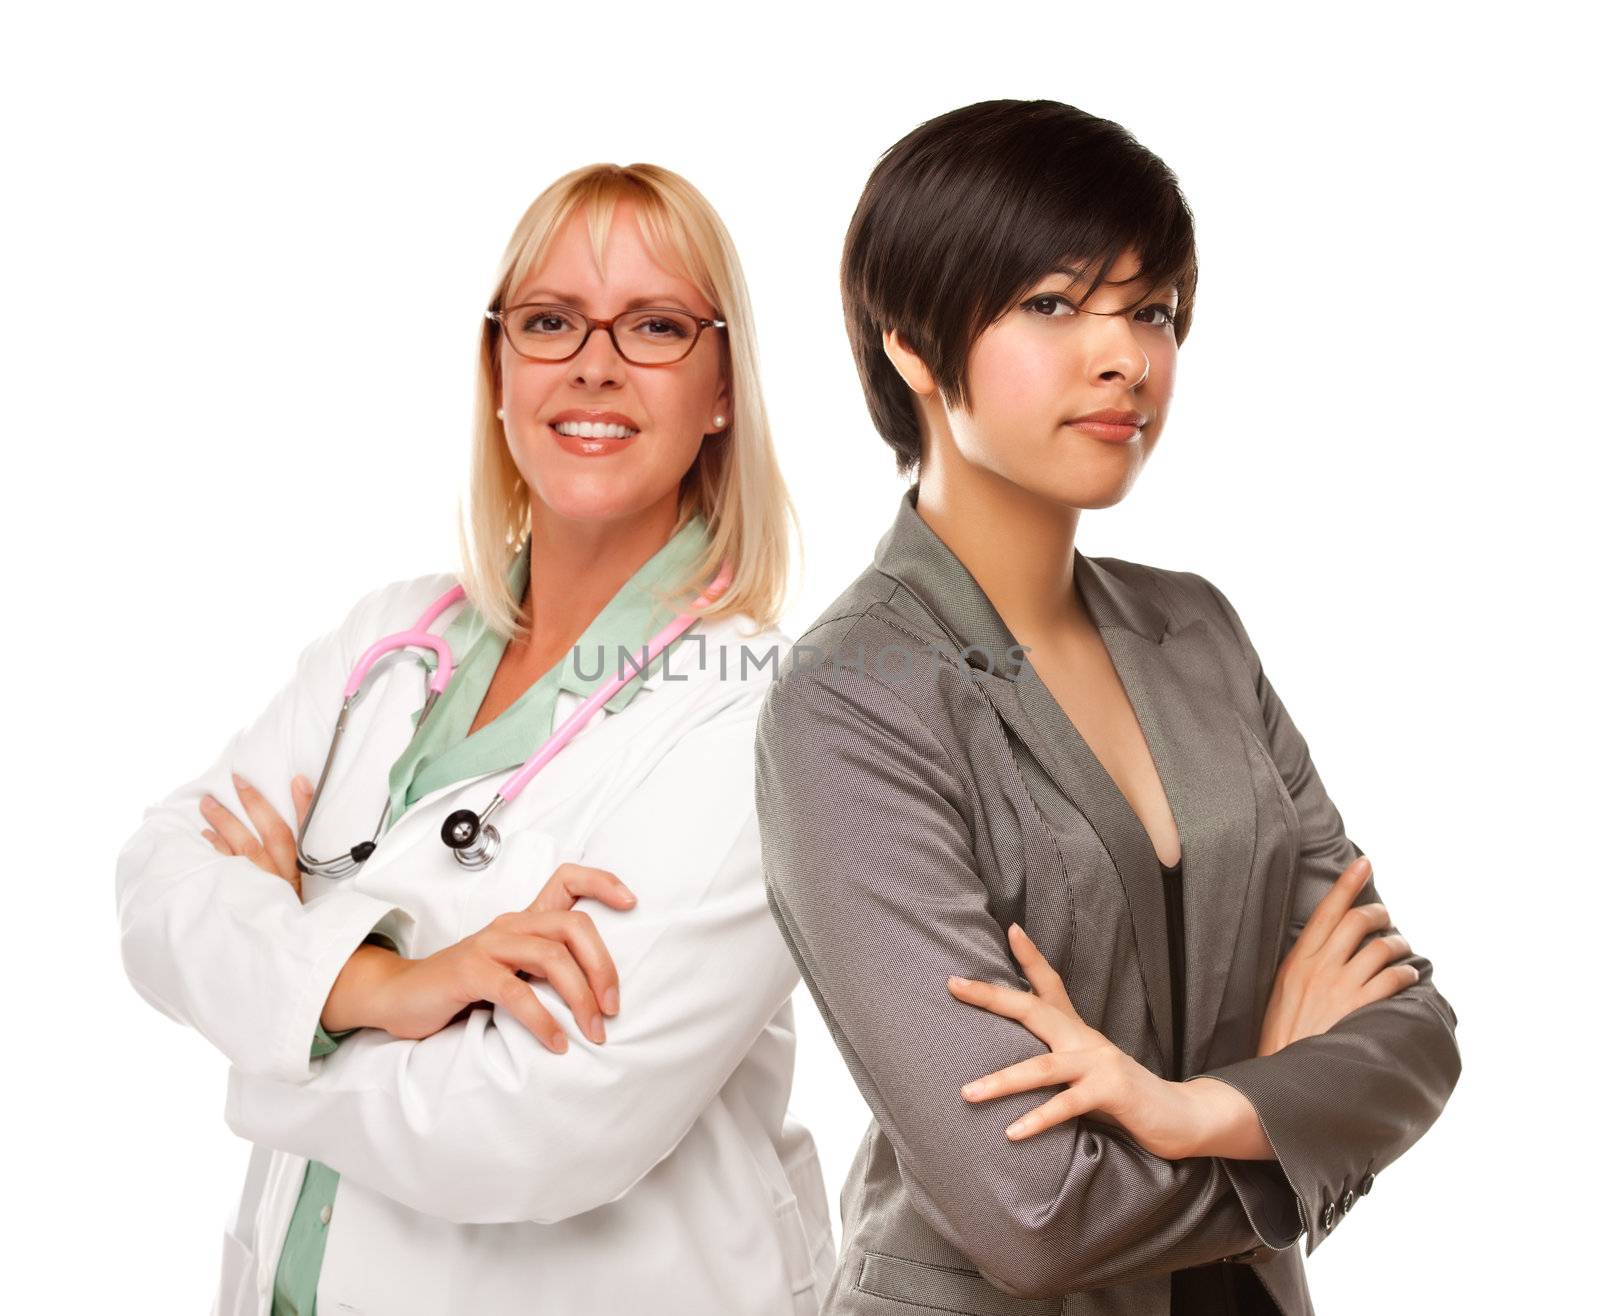 Young Mixed Race Woman with Female Doctor or Nurse on White by Feverpitched